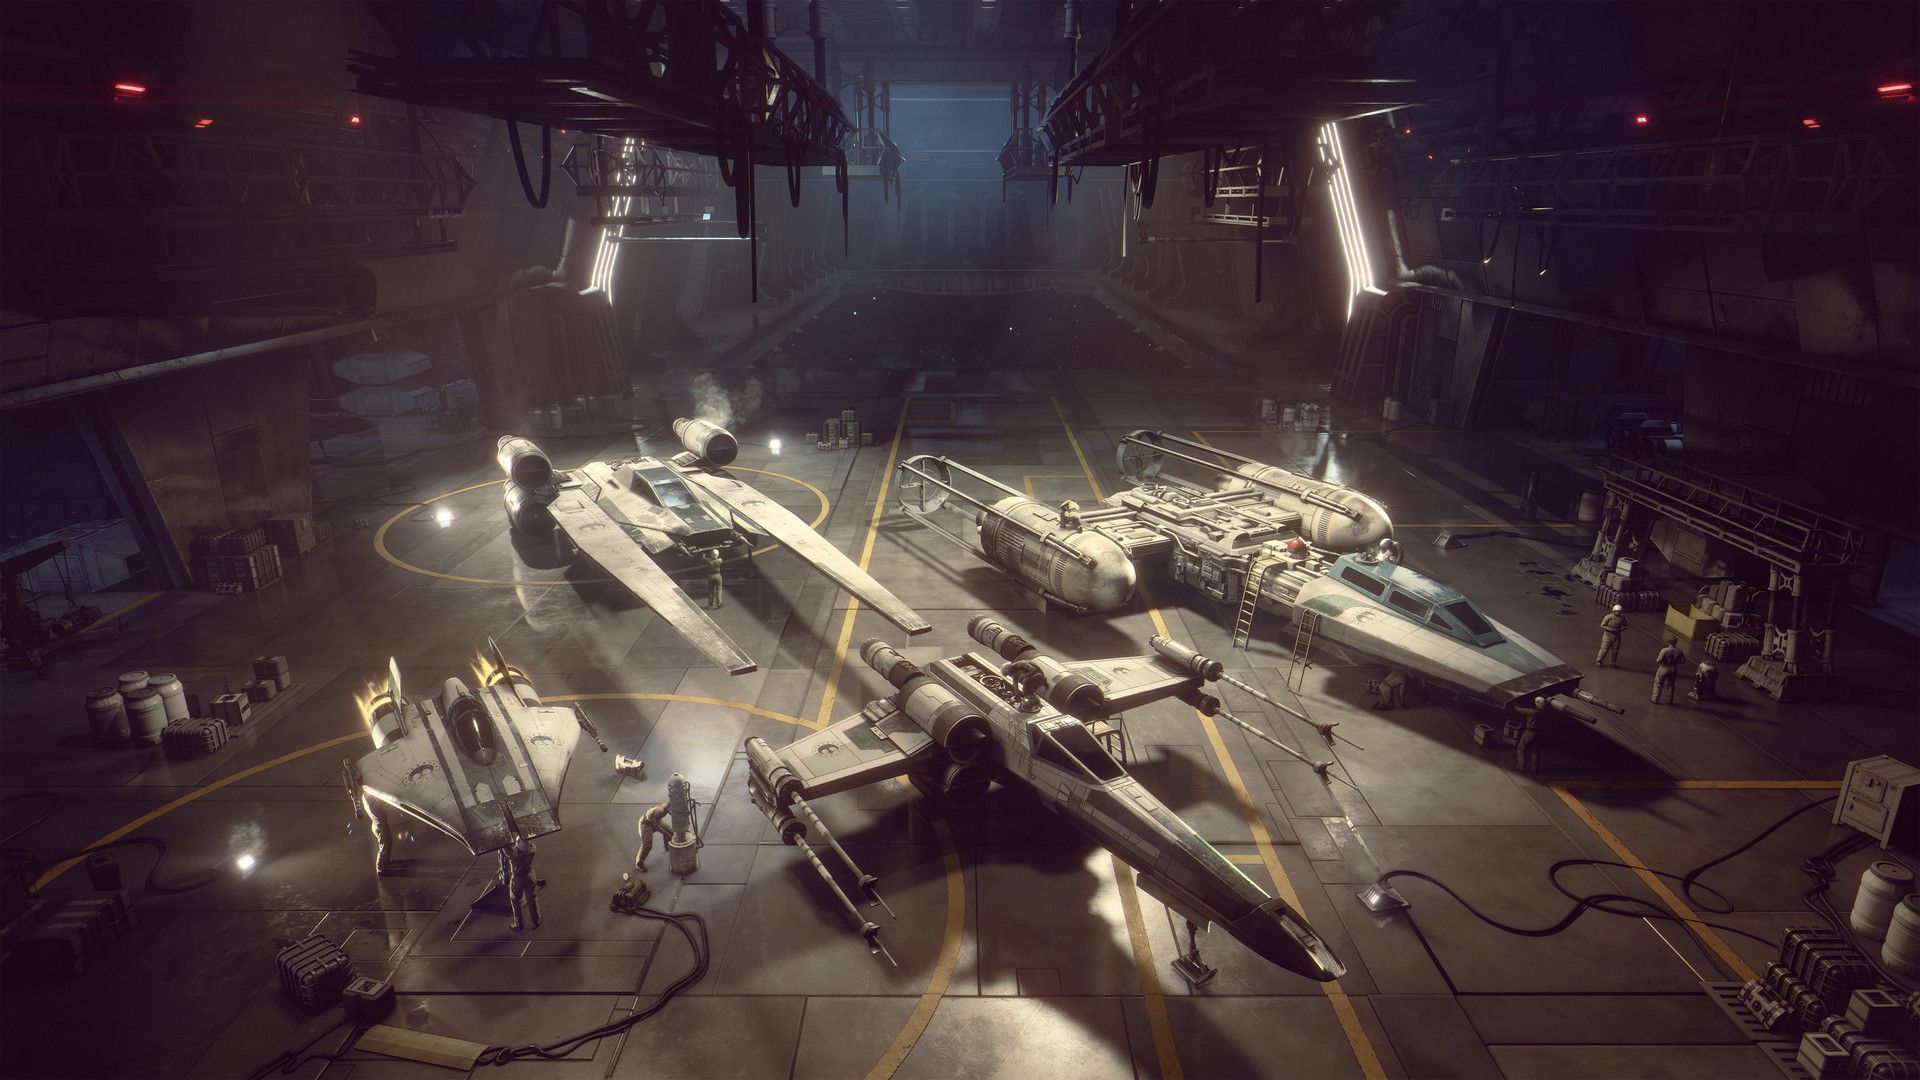 Space dogfighting game Star Wars: Squadrons unveiled, comes